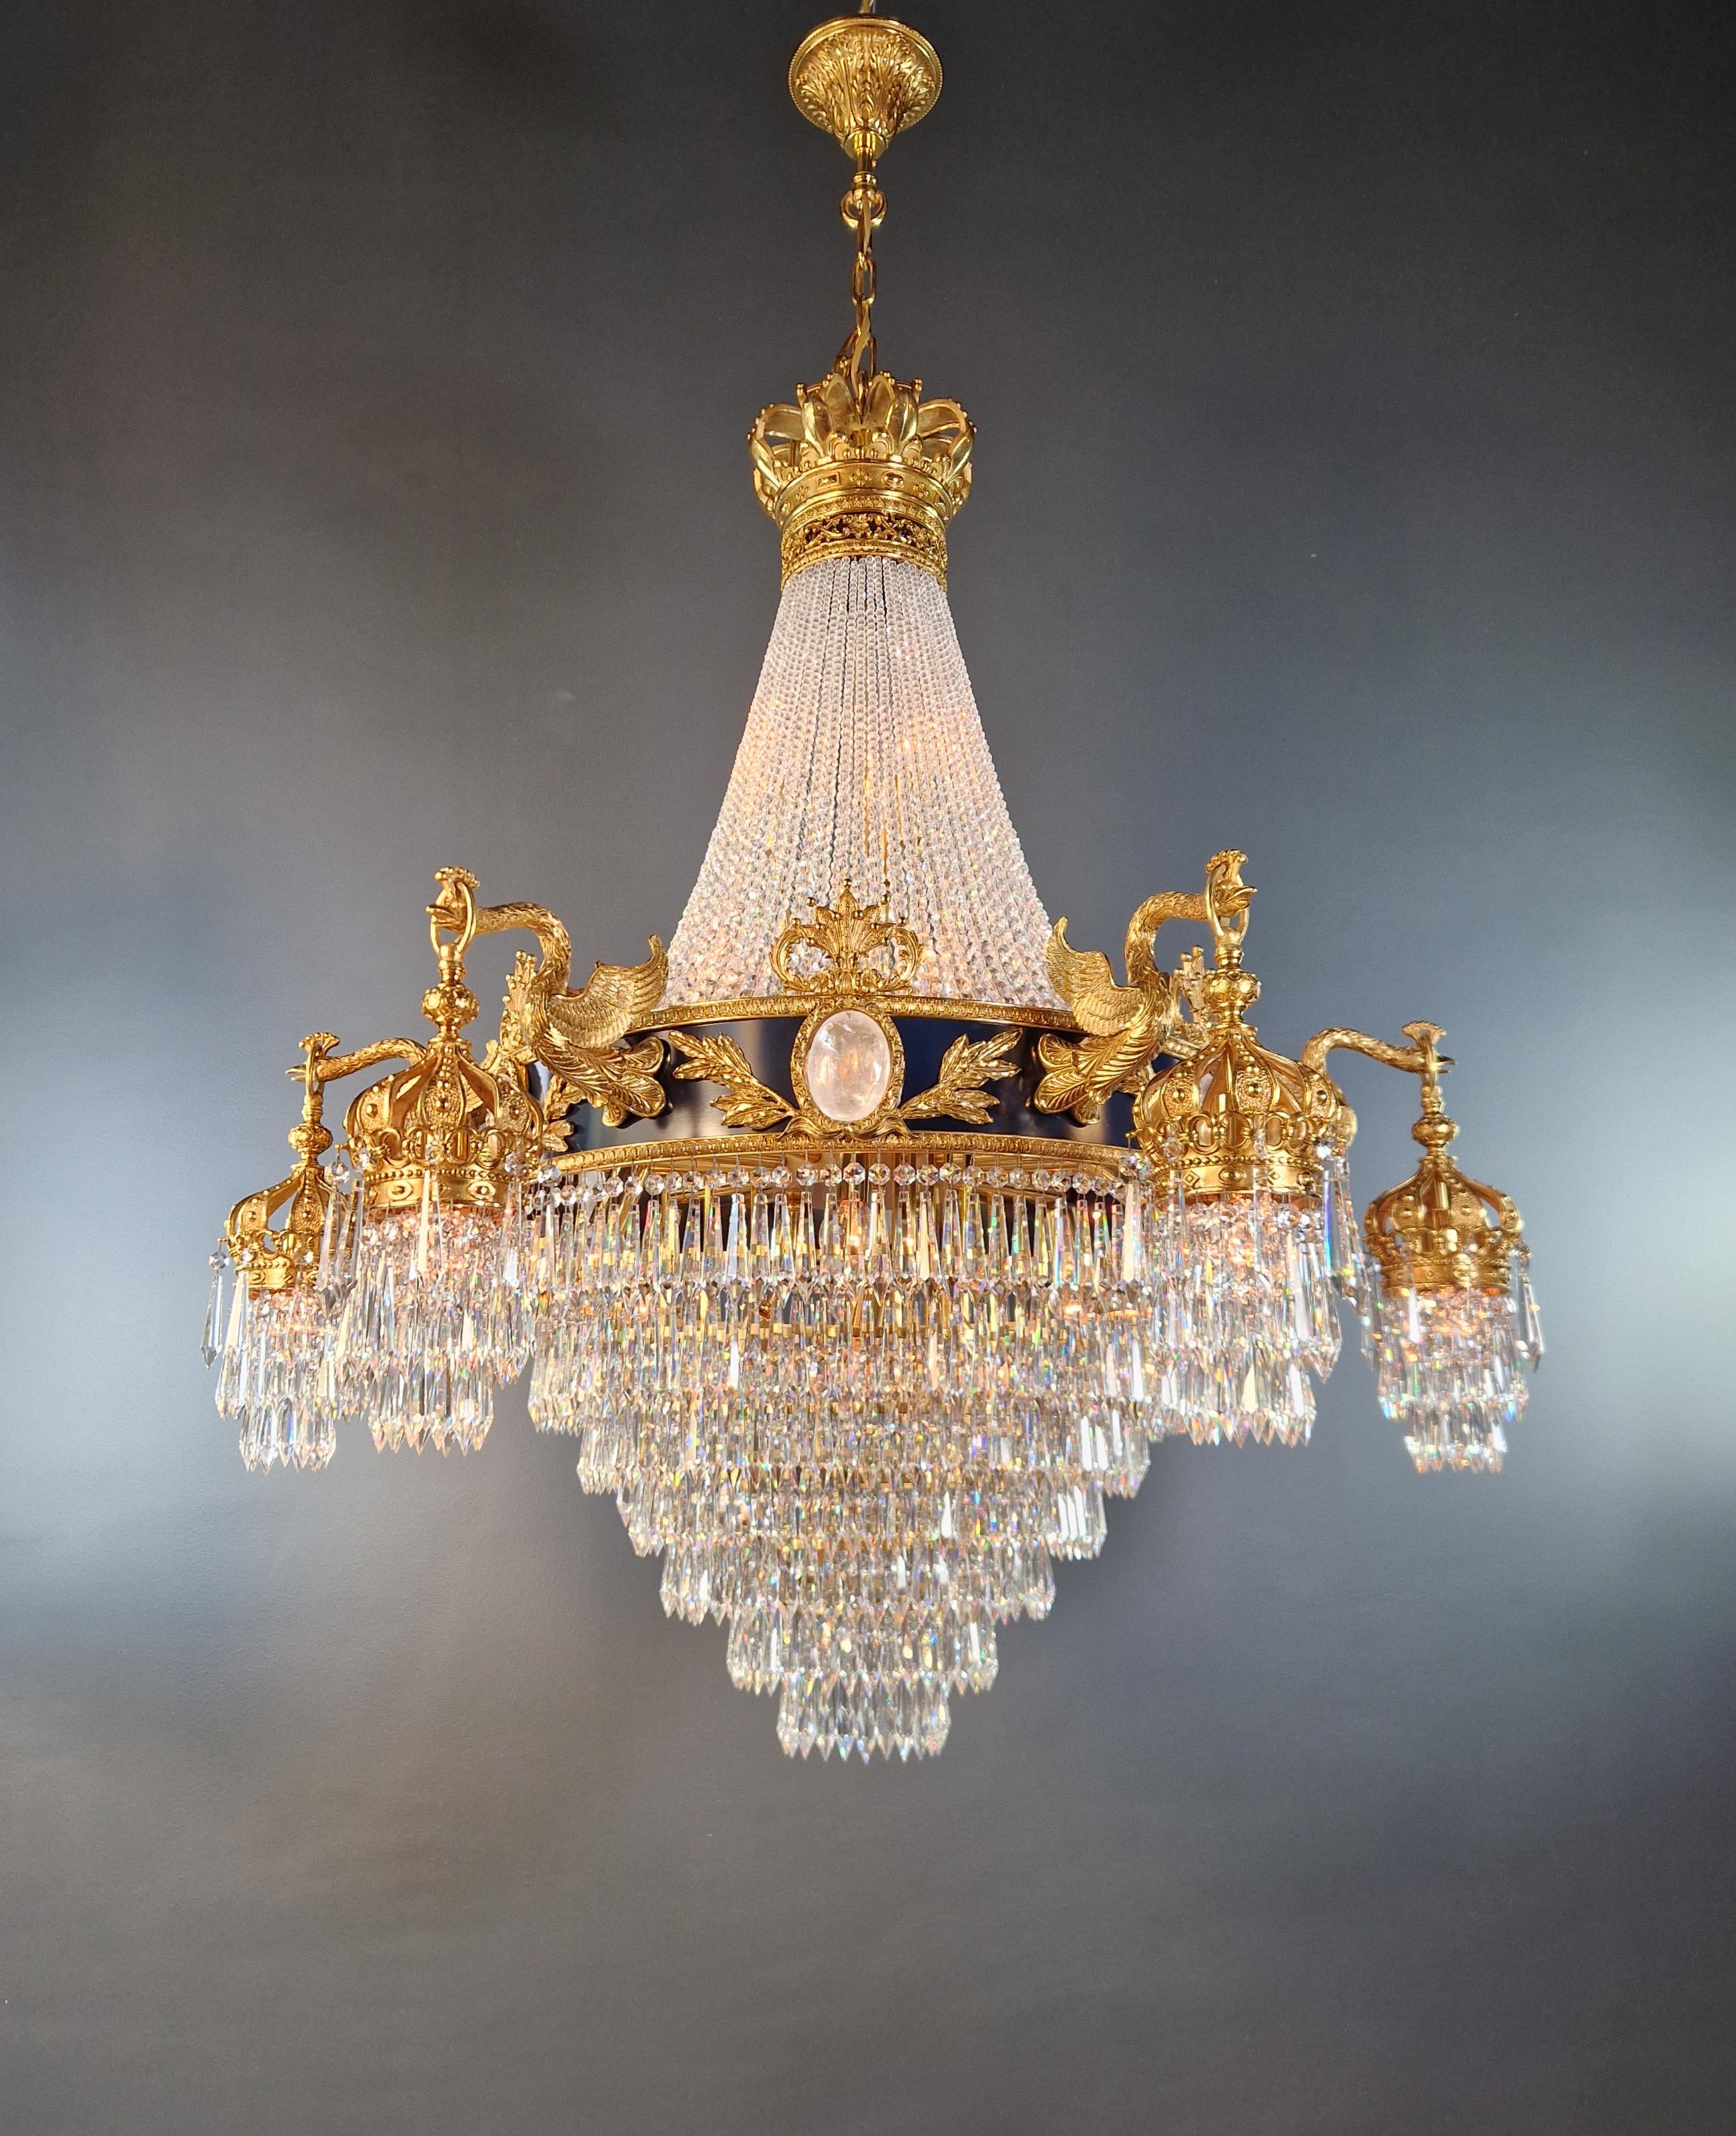 Introducing a stunning Brass Baroque Empire Chandelier, an exquisite piece adorned with captivating crystals, reminiscent of the classical style of the Empire era. This is a new reproduction, and several are available, ensuring you can bring this